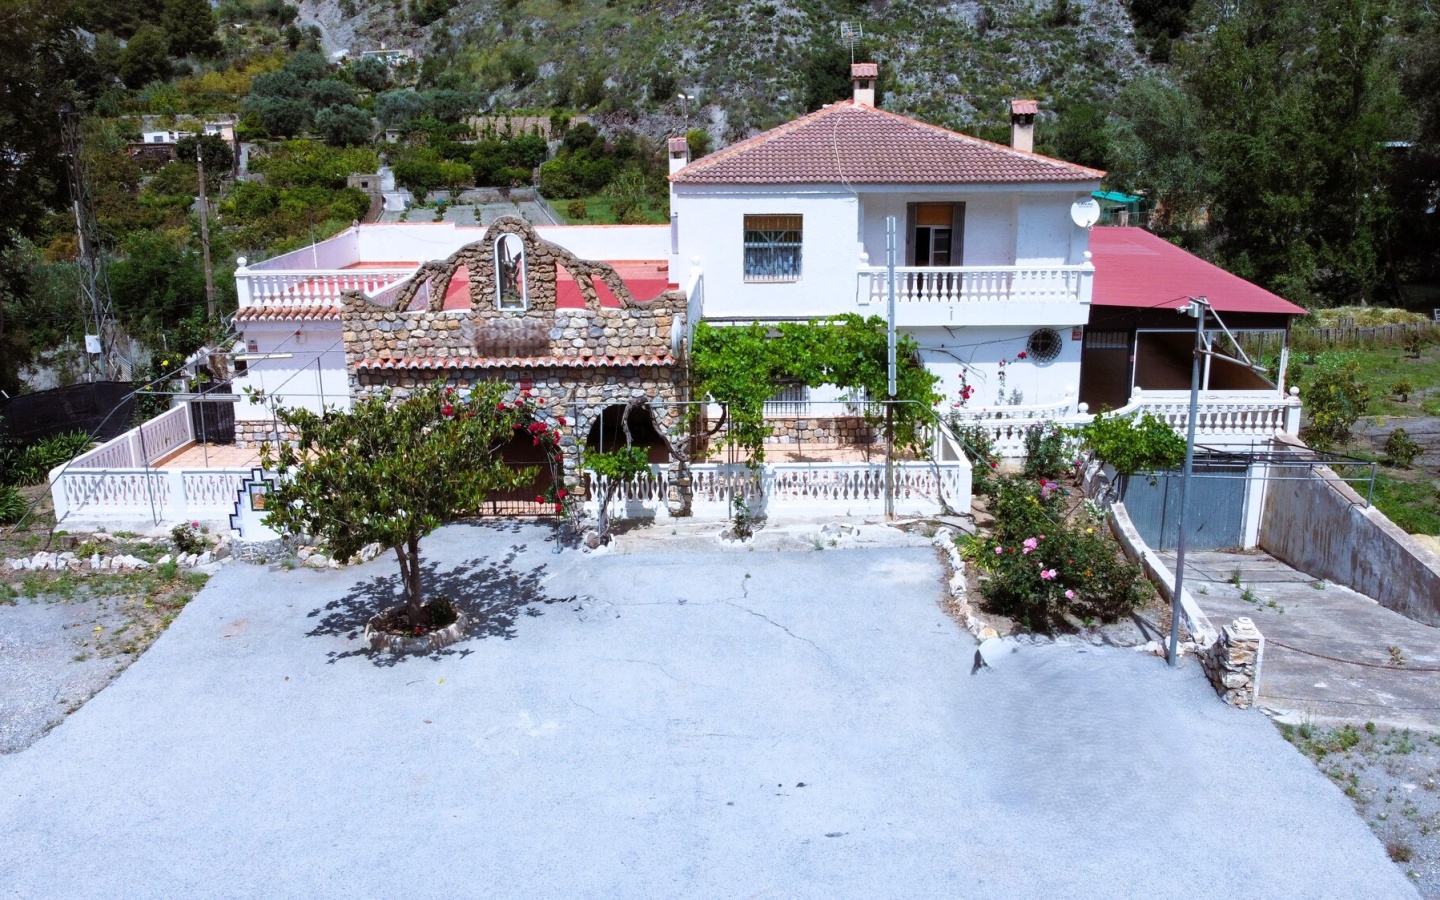 Velez de Benaudalla. Property with great potential as a business or home